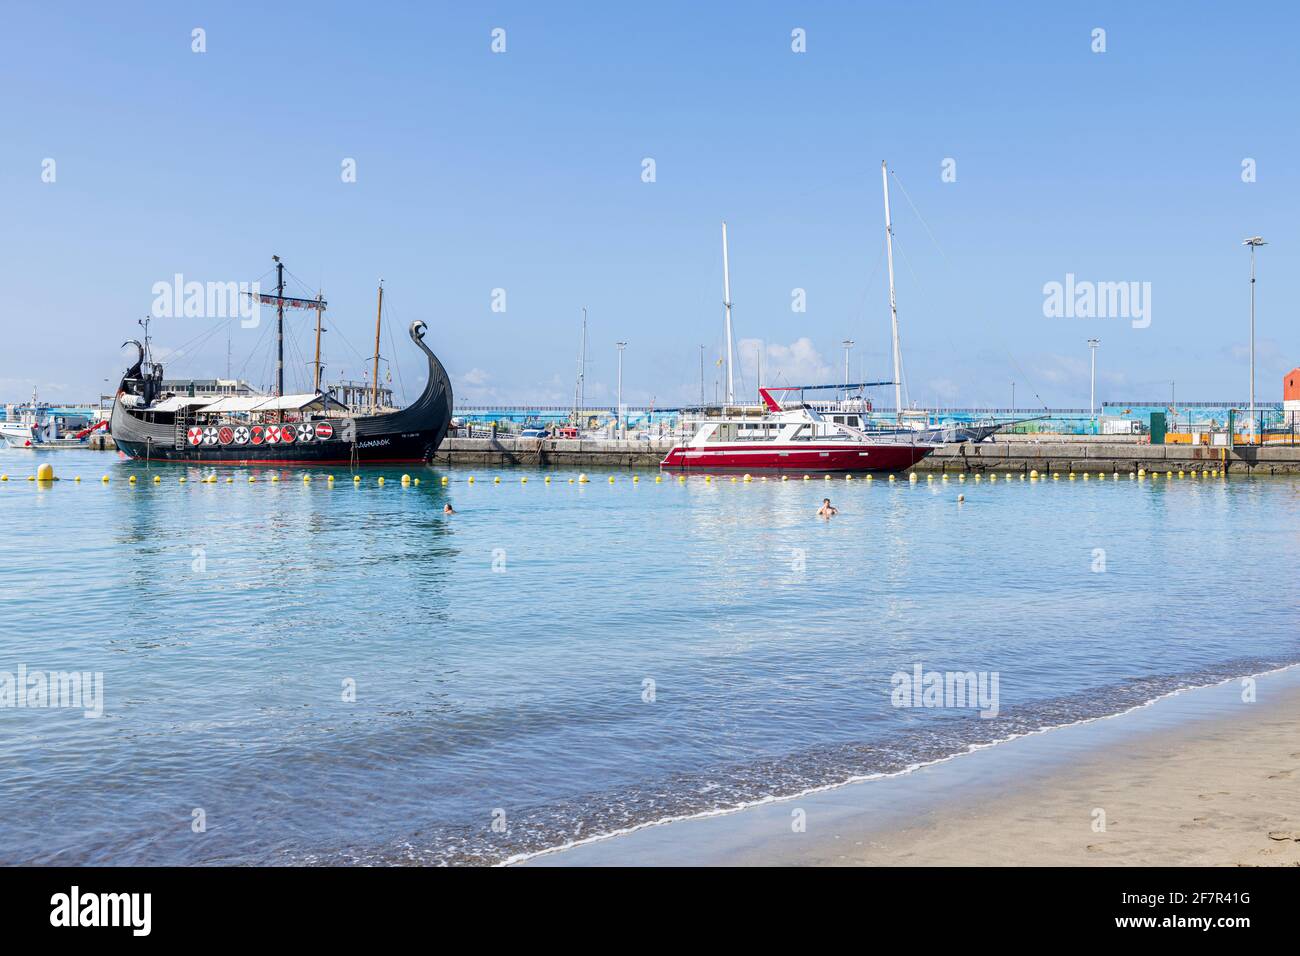 Viking boat in the harbour at Los Cristianos beach, Tenerife, Canary Islands, Spain Stock Photo